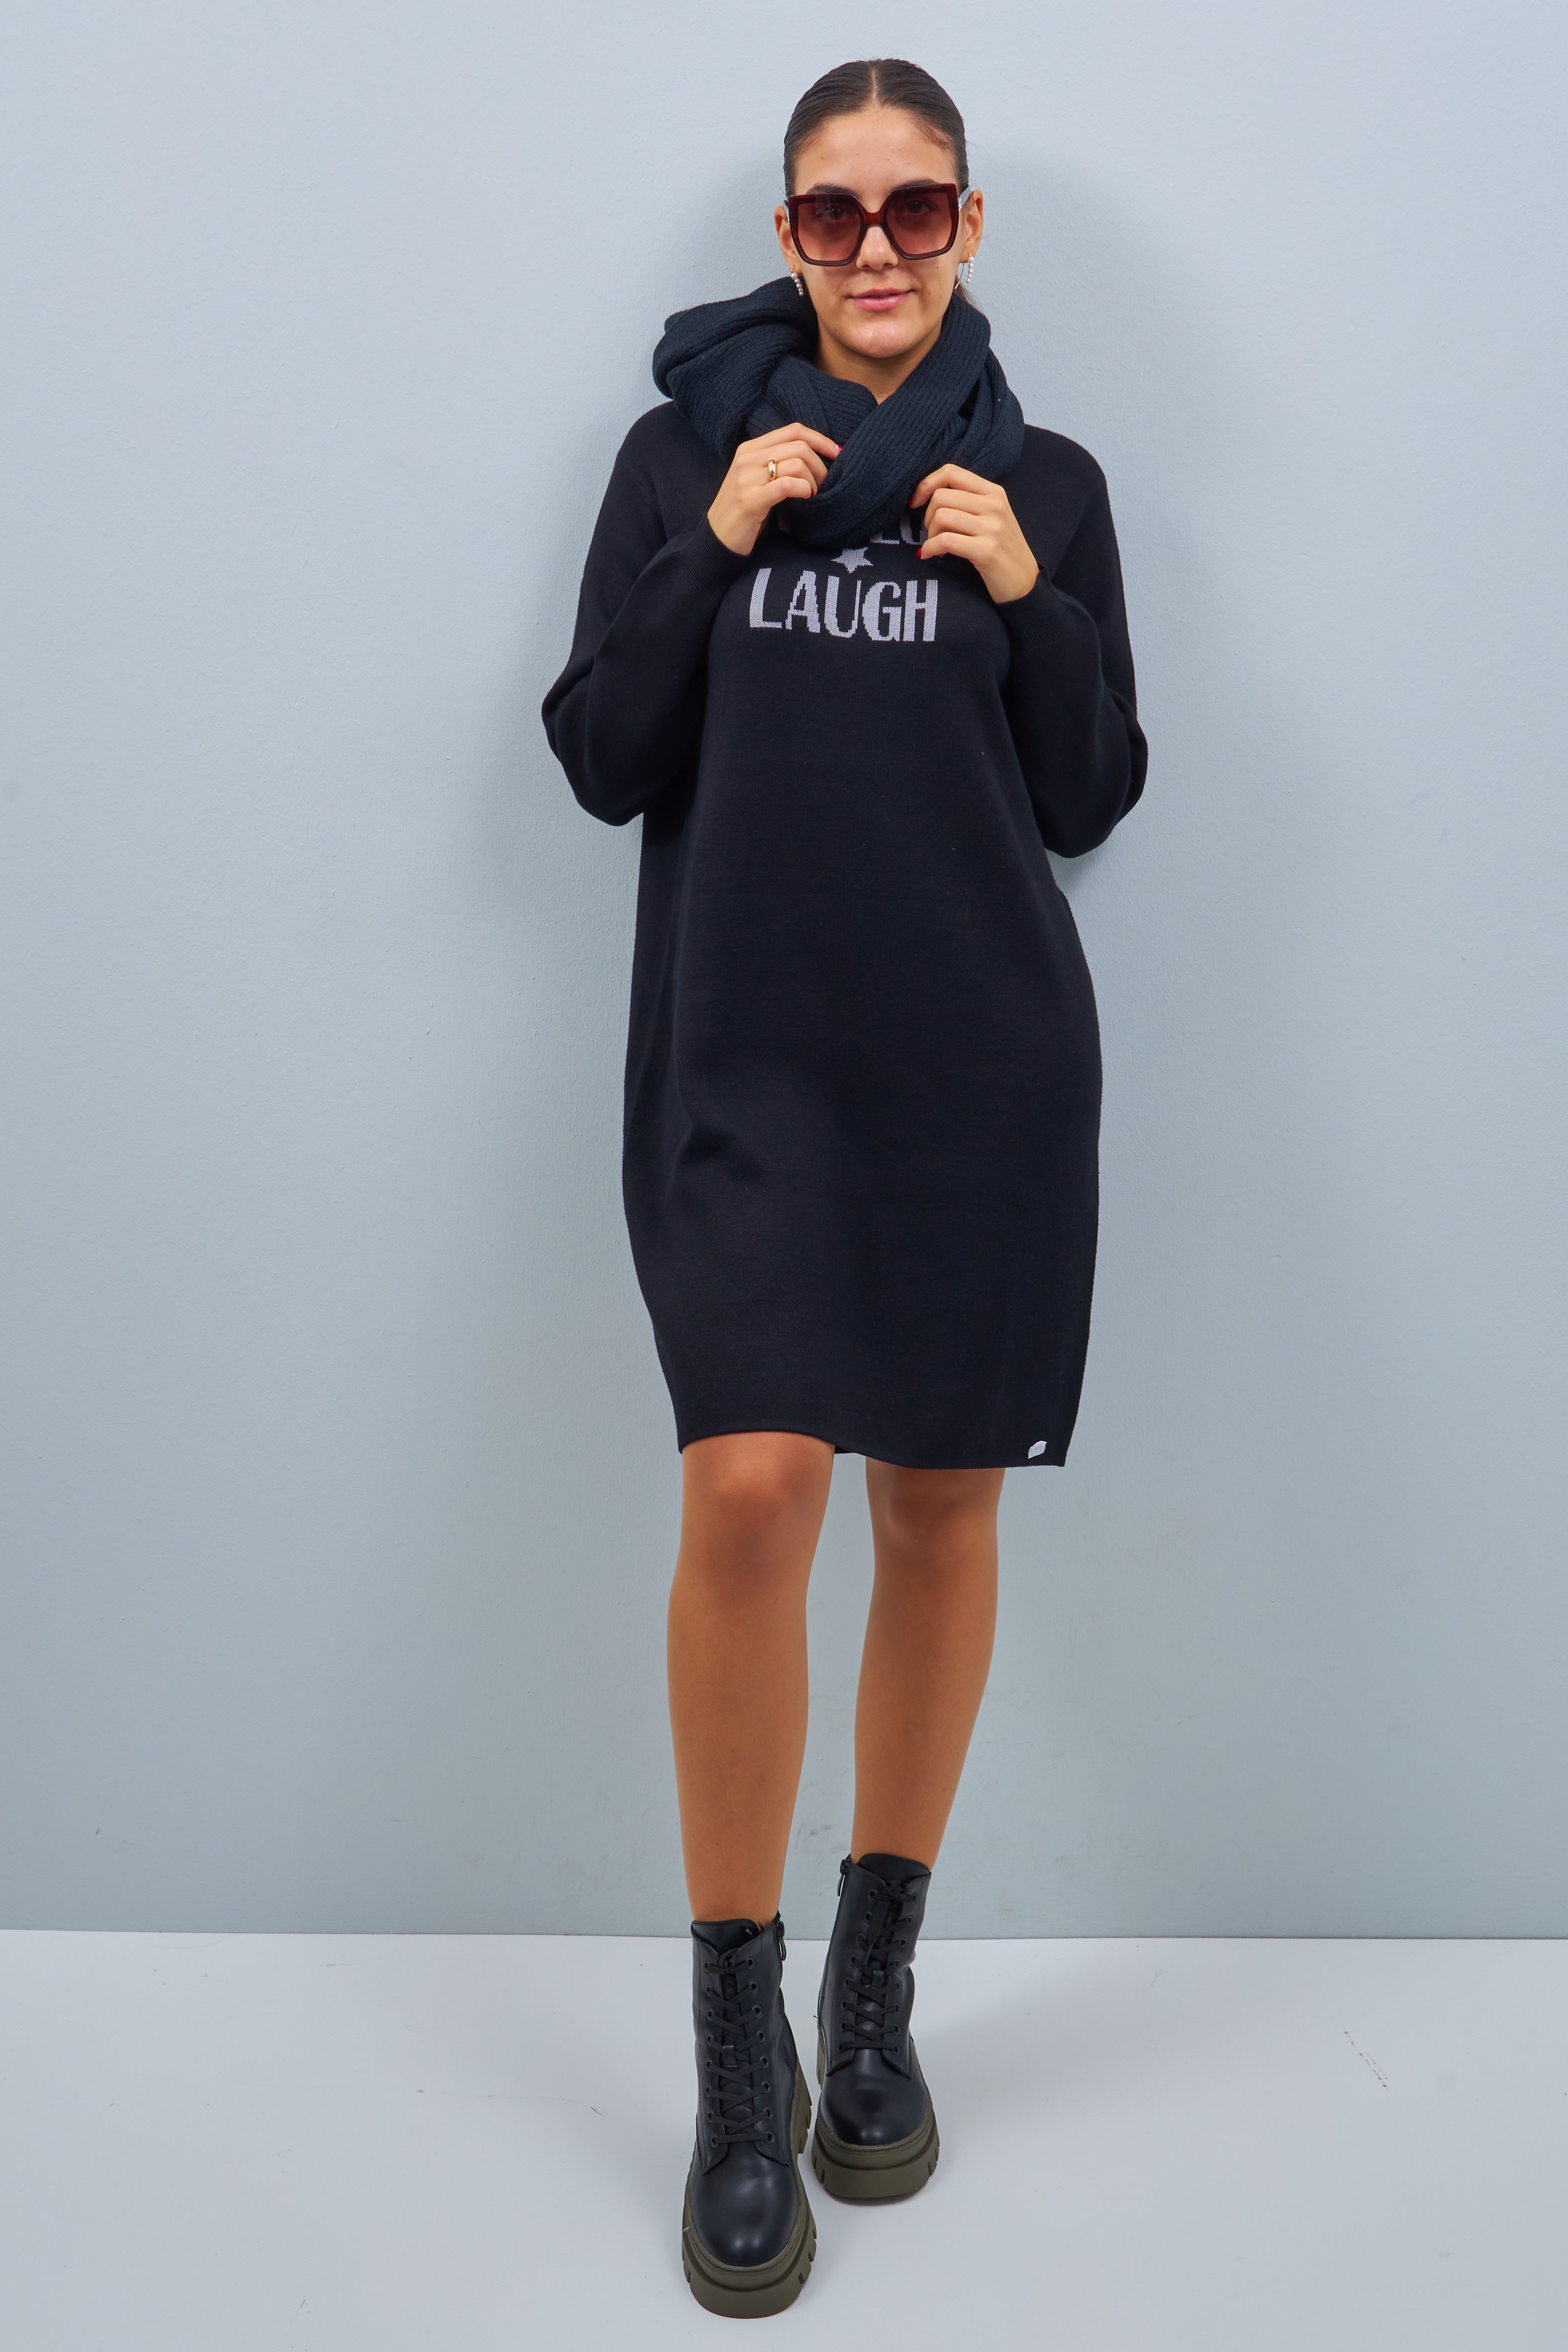 Knit dress with Love-lettering, black